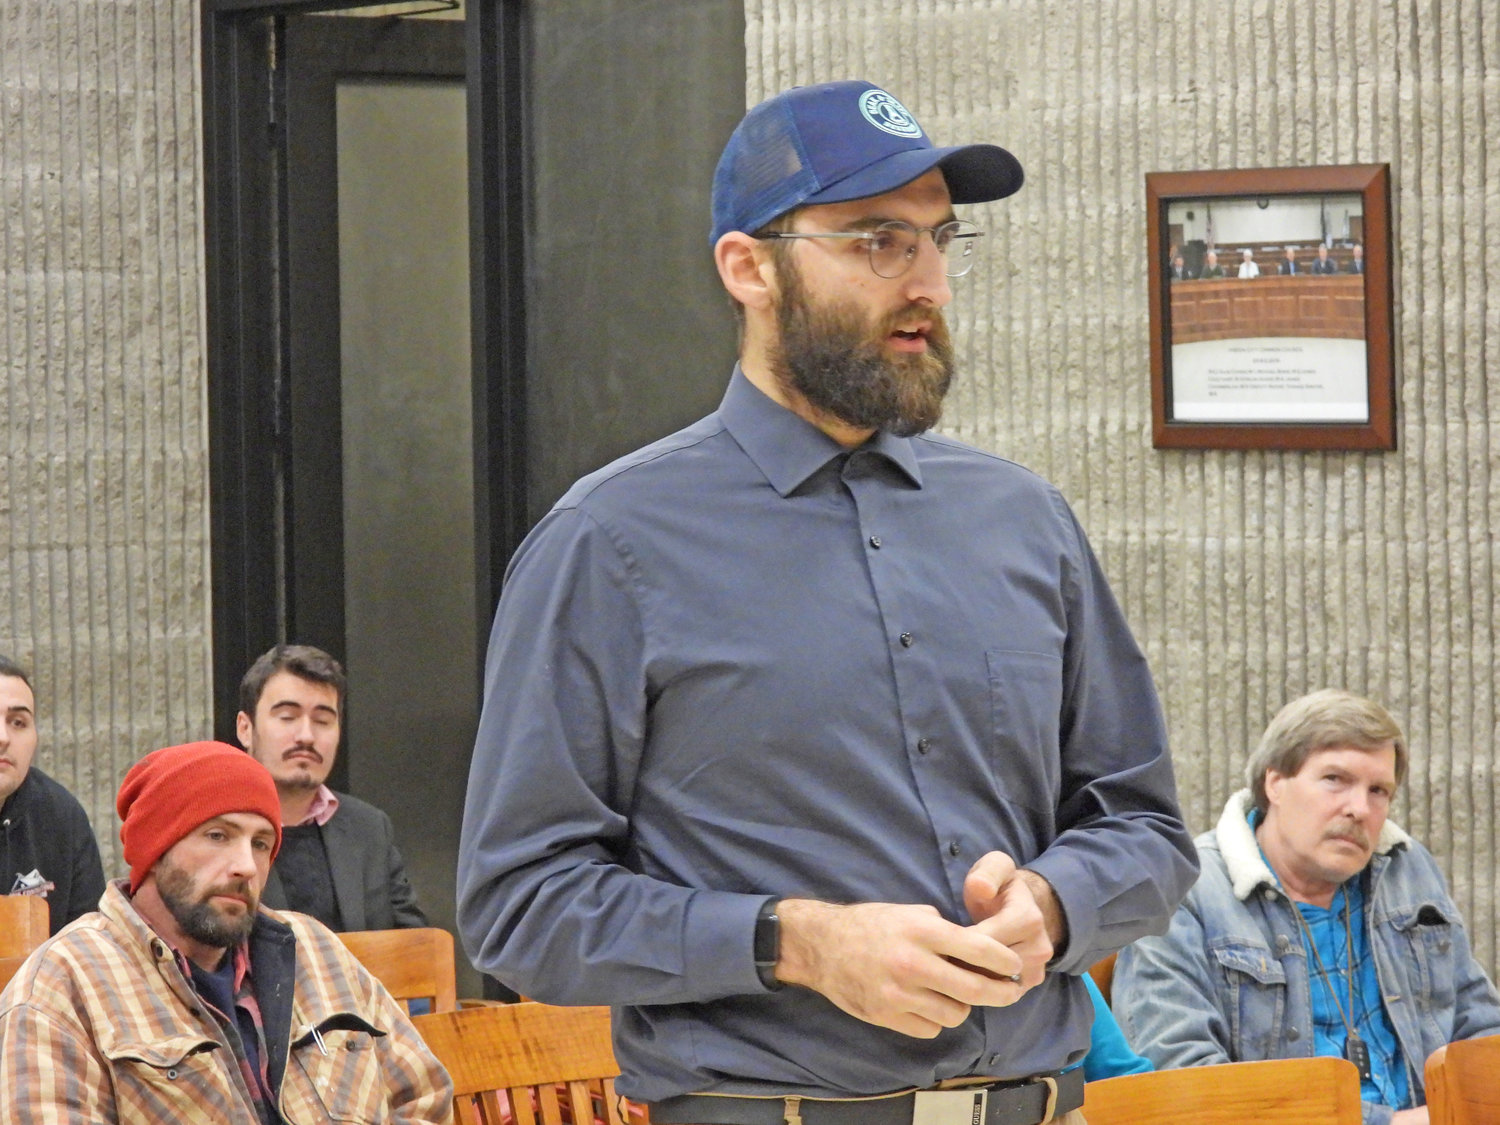 FLOATING A COMPROMISE — Jacob Cornell, co-owner of Cornell’s Greenhaus in Oneida, tells the city council they can follow Morrisville and Norwich’s example and opt out of on-site consumption establishments but opt in to retail cannabis dispensaries if they’re concerned about people driving under the influence.